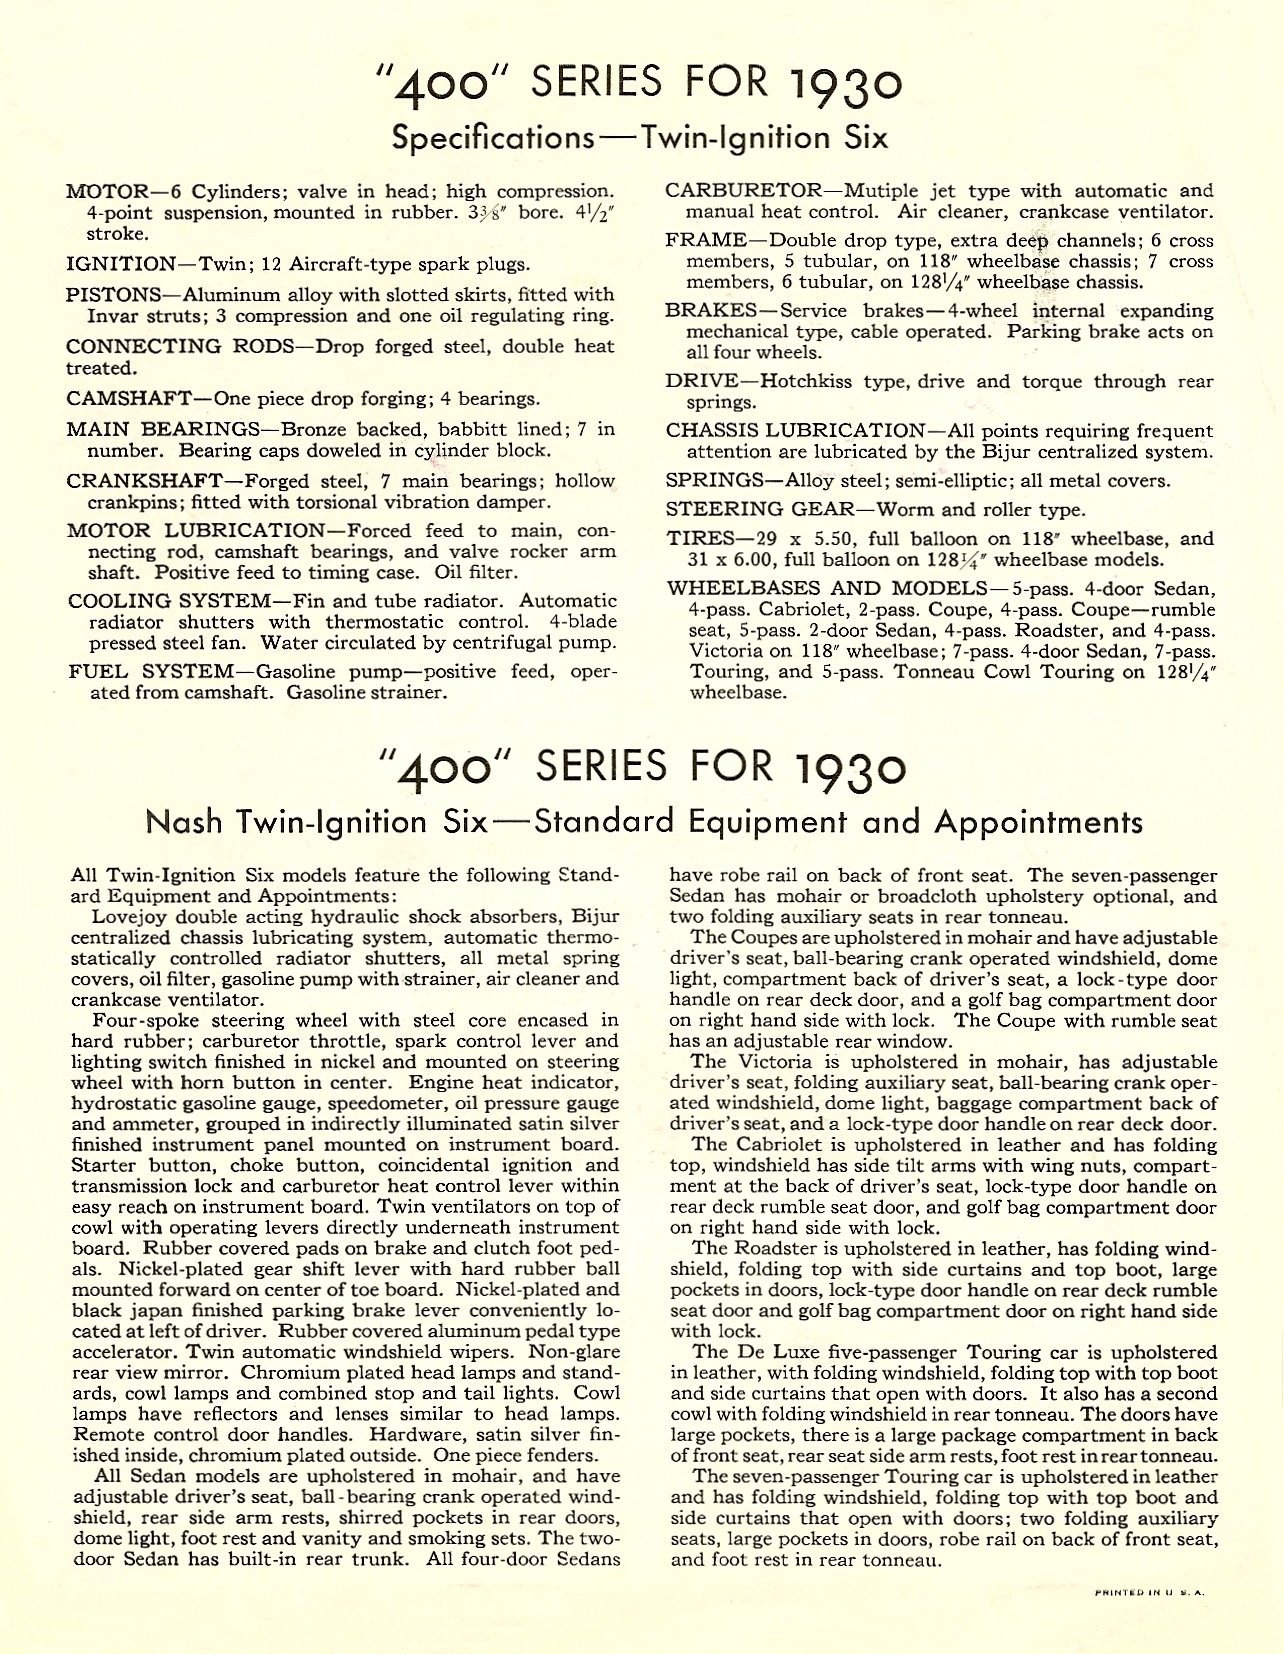 1930 Nash 400 Twin Ignition Six Coupes Folder Page 4